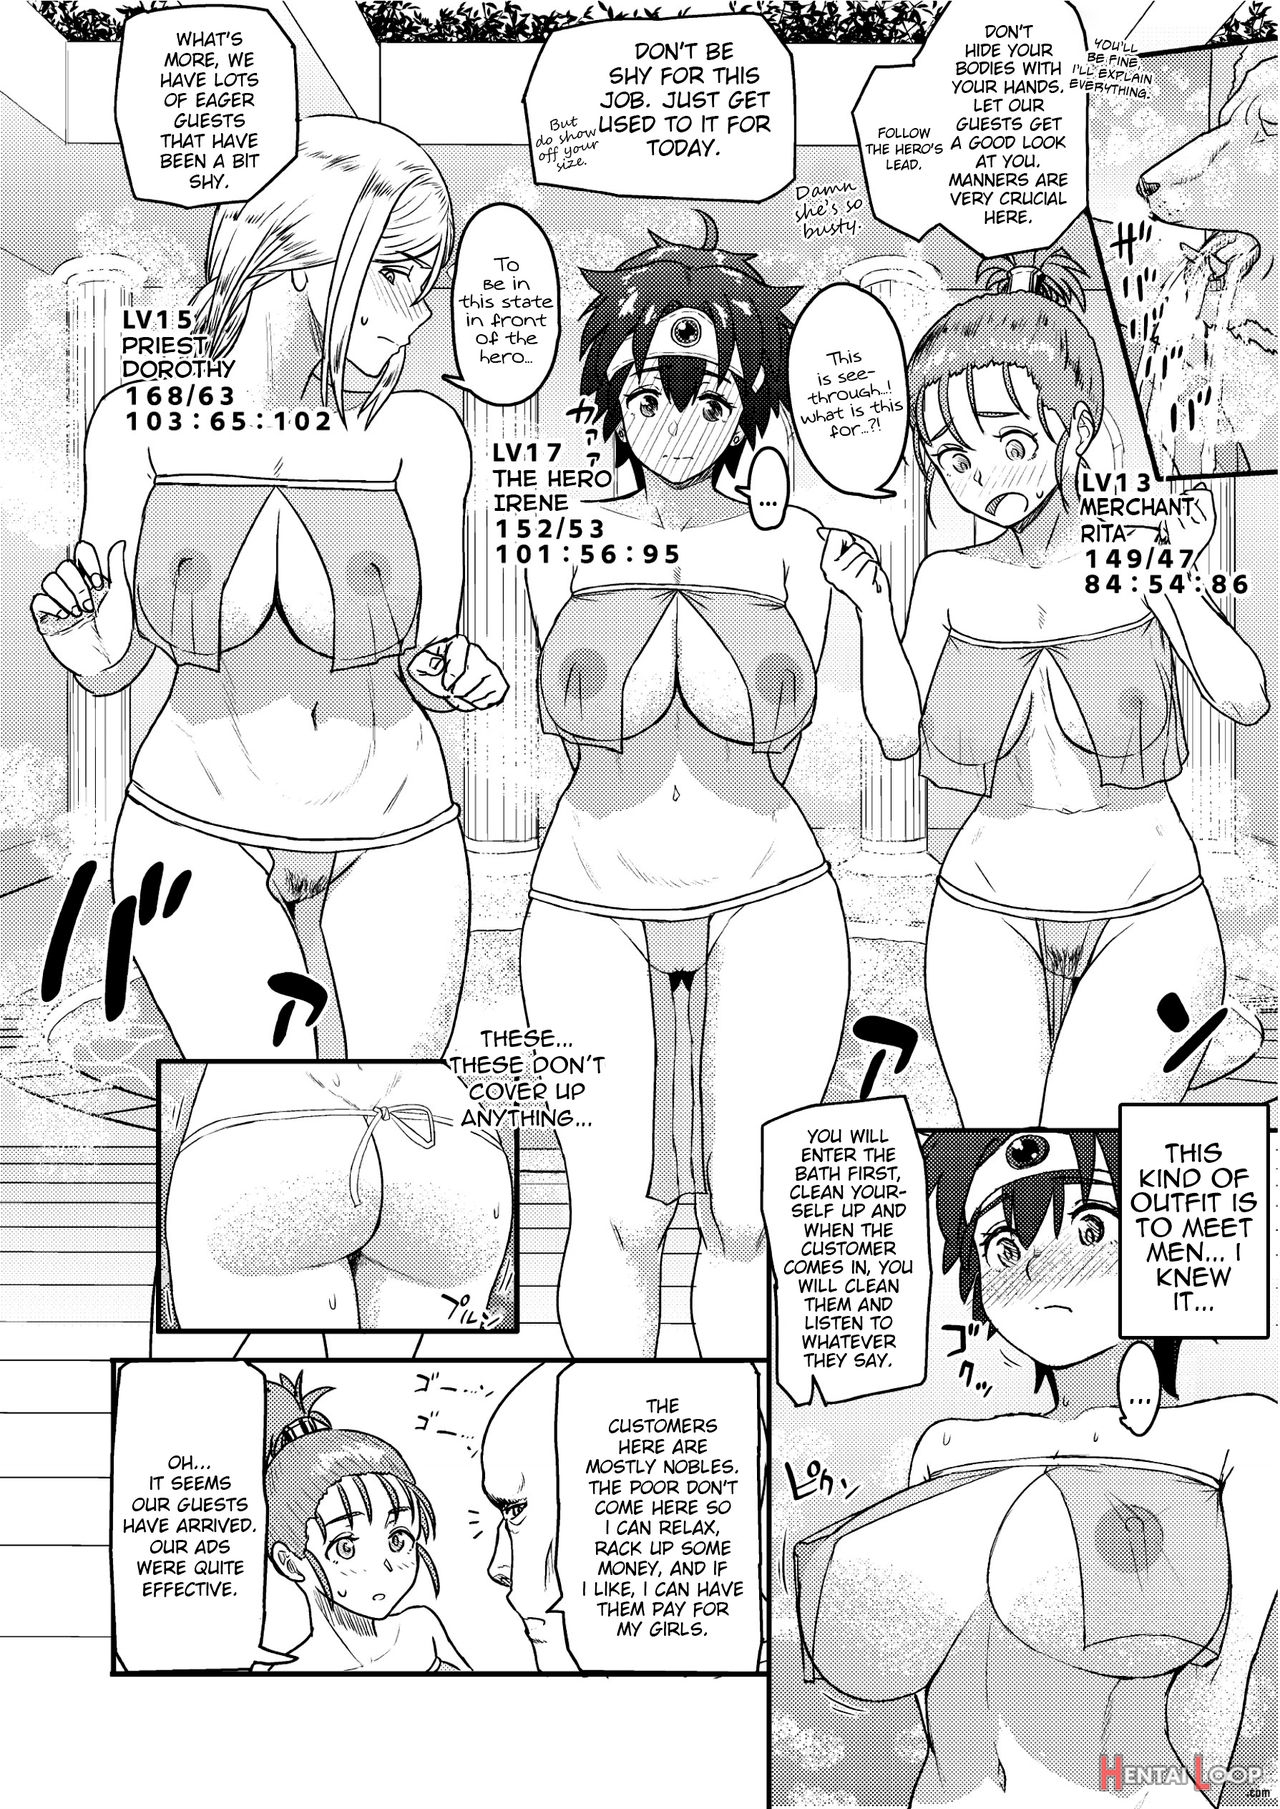 The Top Notch Newbie Soap Heroine page 4